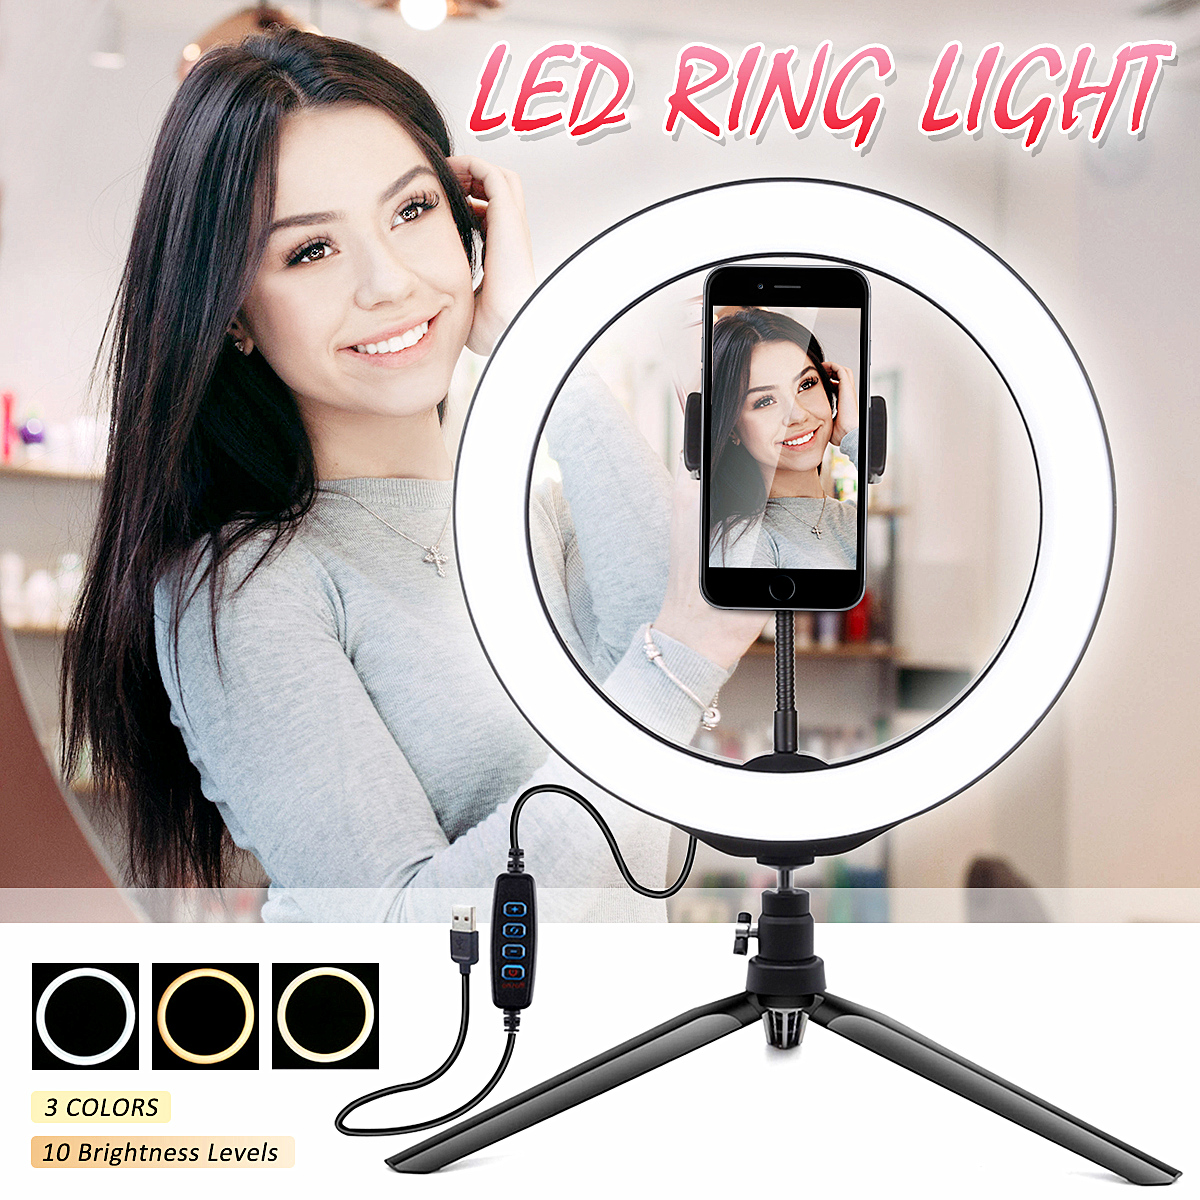 Portable-102-inch-Stepless-Adjustable-LED-Ring-Full-Light-Tripod-Stand-Live-Selfie-Holder-with-USB-P-1736461-1